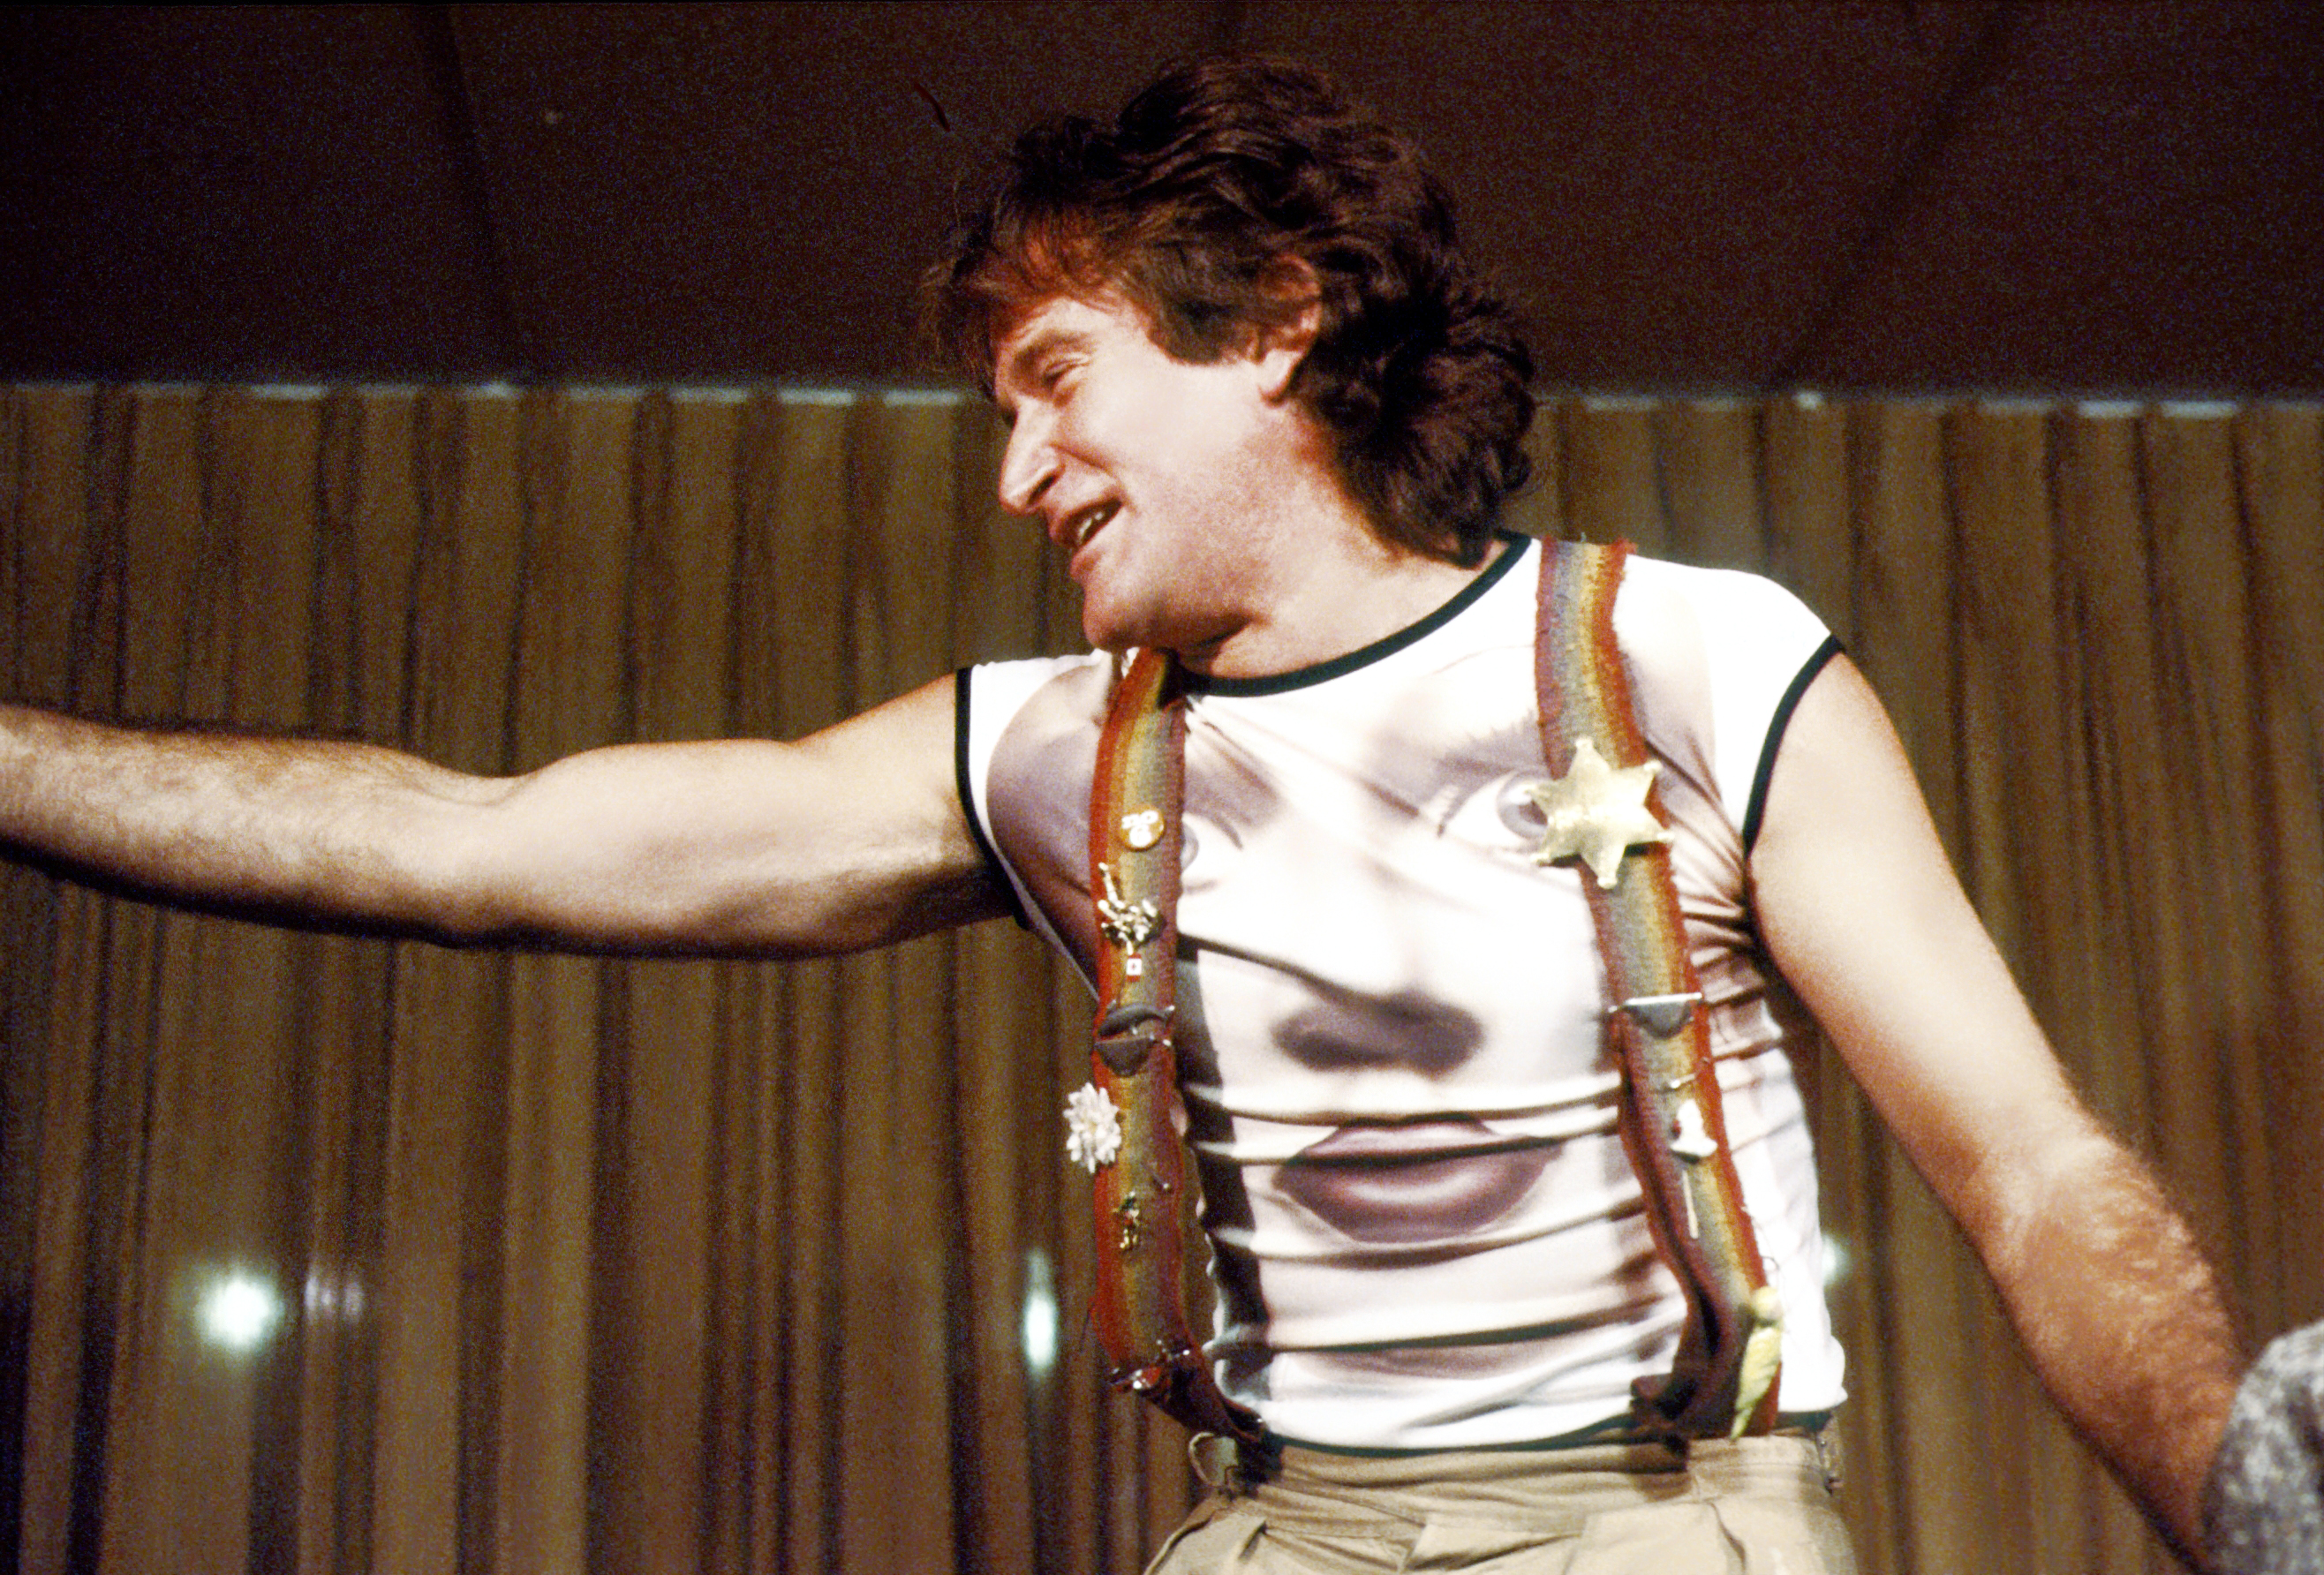 Robin Williams in rainbow suspenders and a face printed t-shirt performing on stage at the Roxy Theatre in 1979